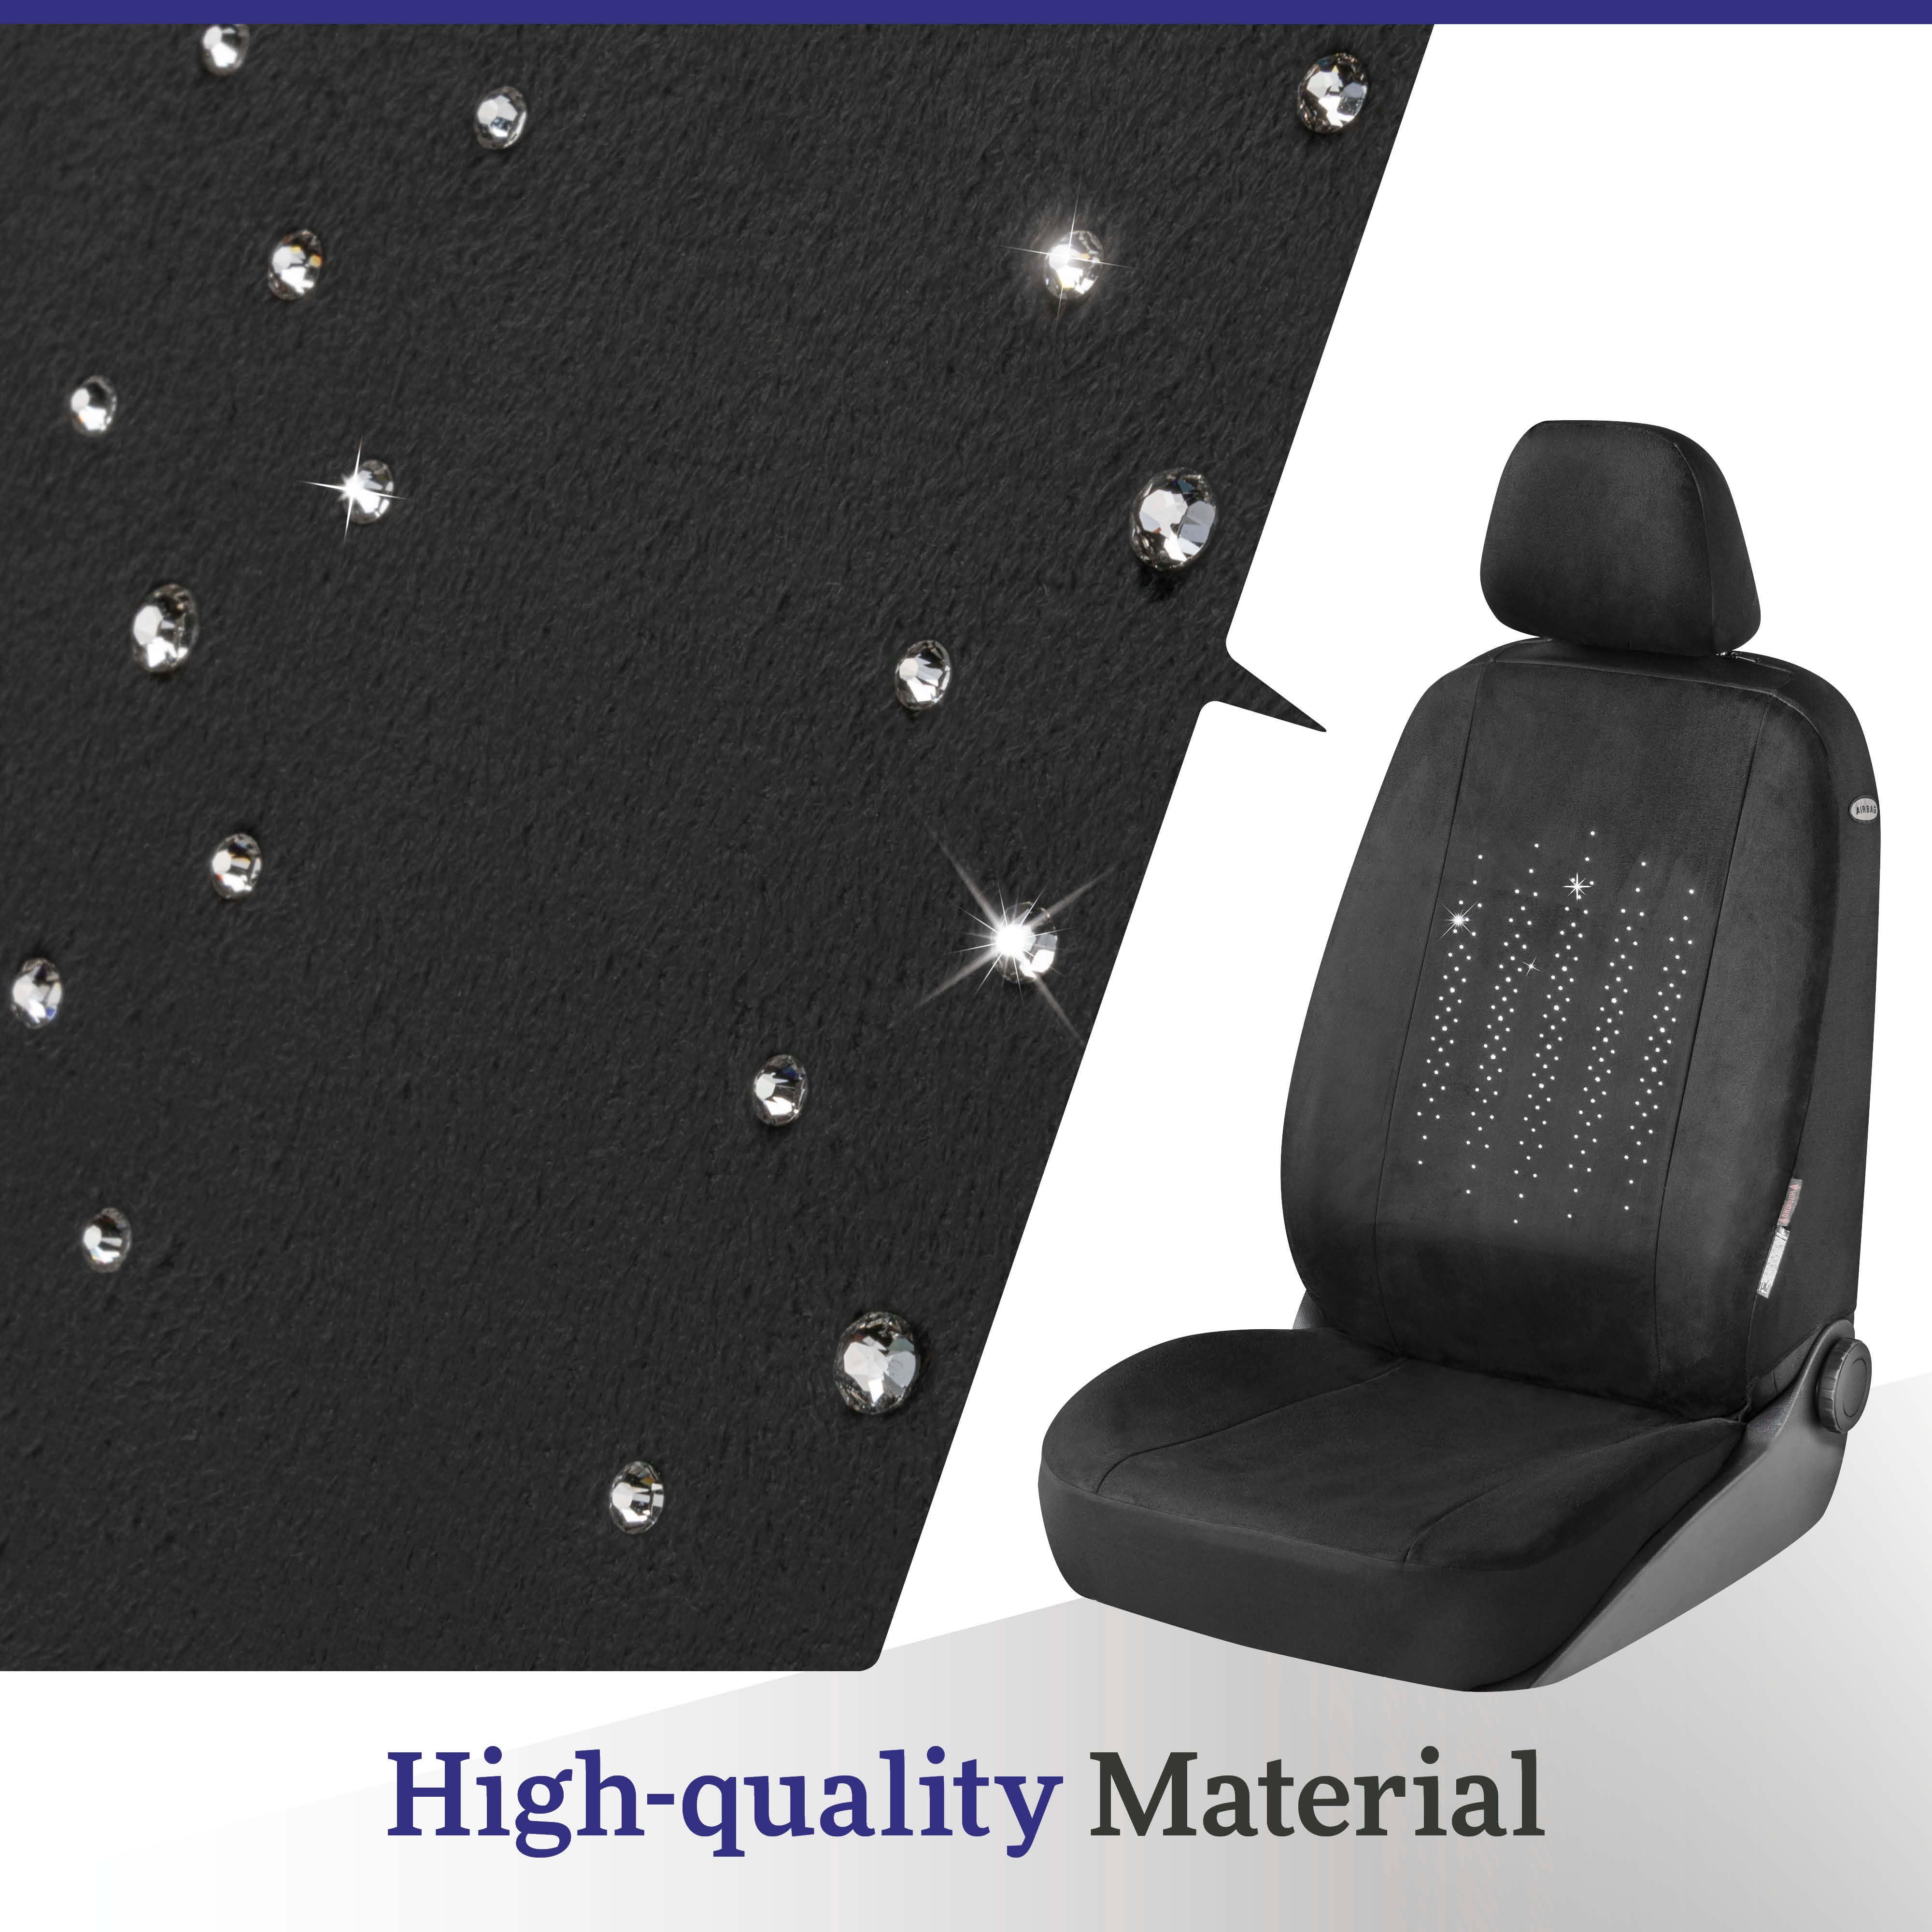 Car Seat cover Julia decorated with Swarovski® crystals for a front seat